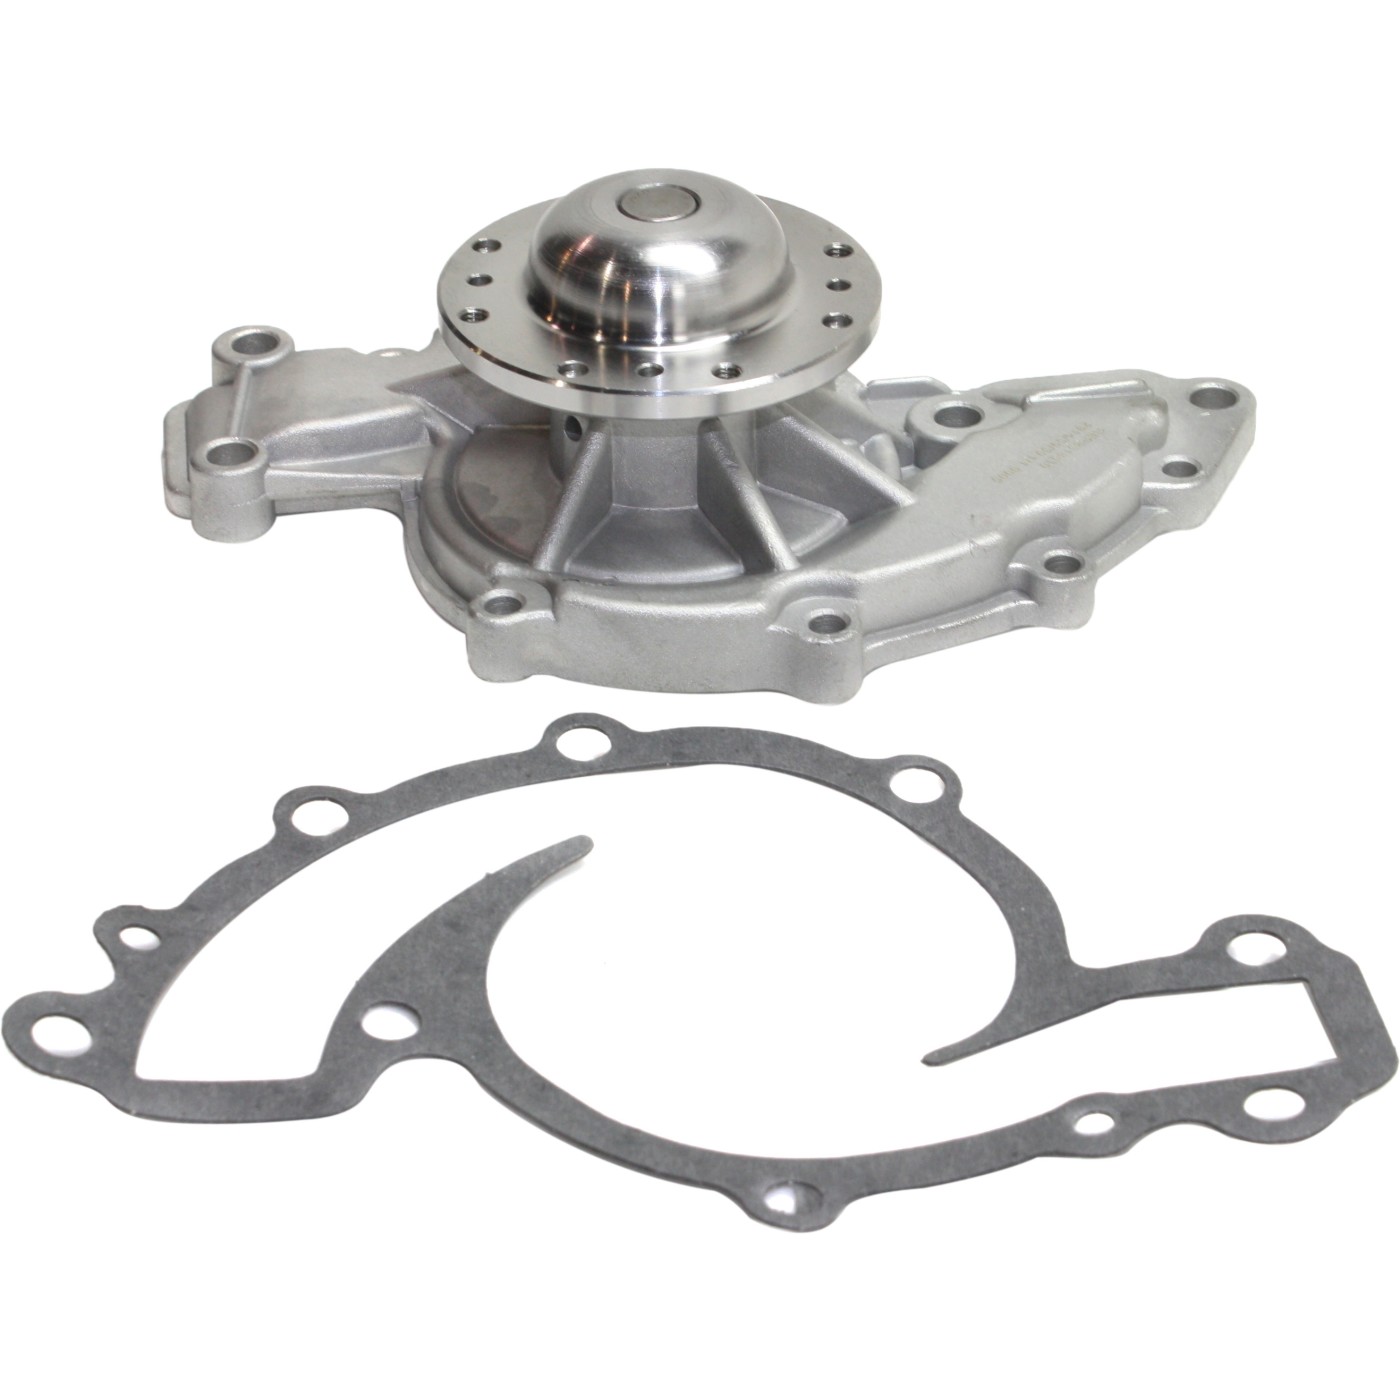 Engine Water Pump for GM Cars NEW | eBay